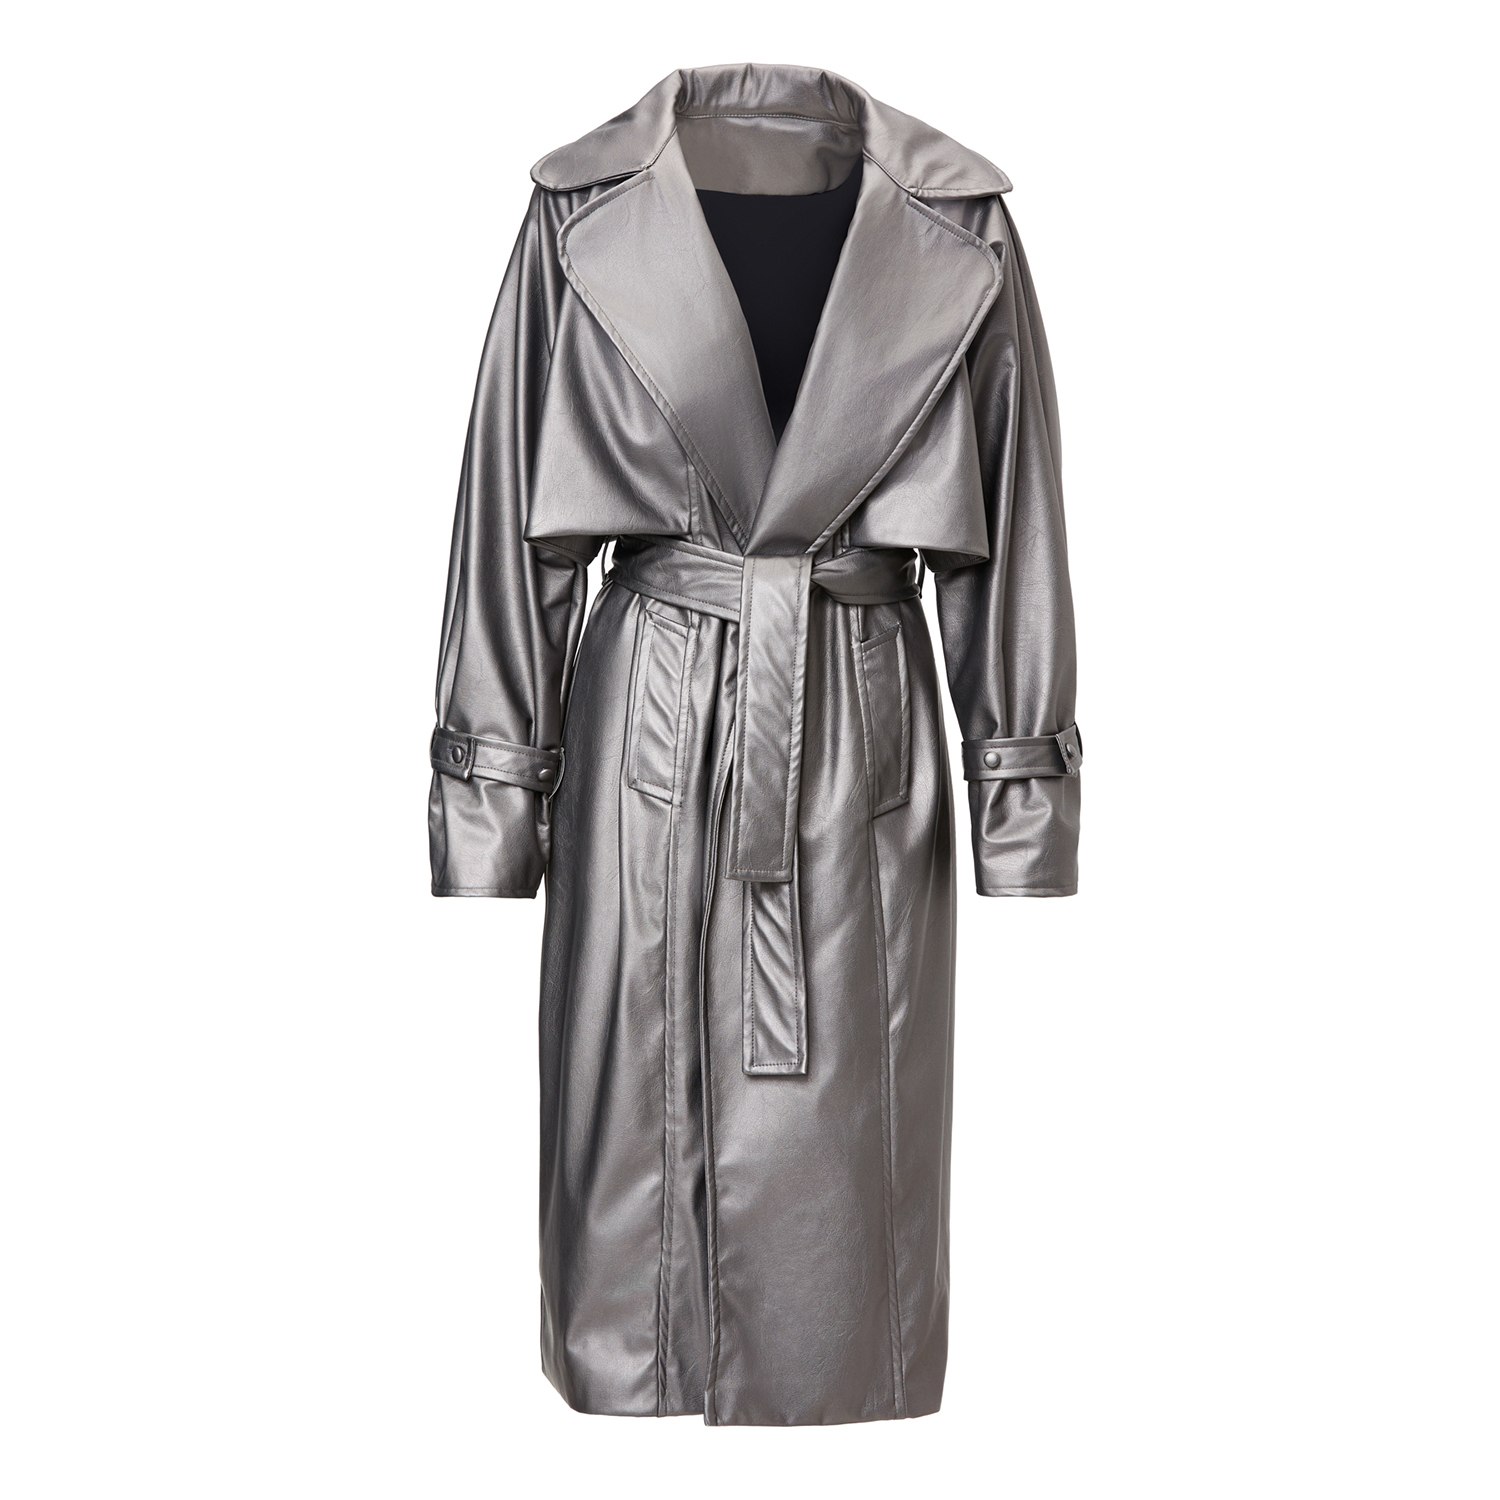 Women’s Silver Metallic Leather Raglan Sleeve Trench Coat With Belt Extra Small Bluzat